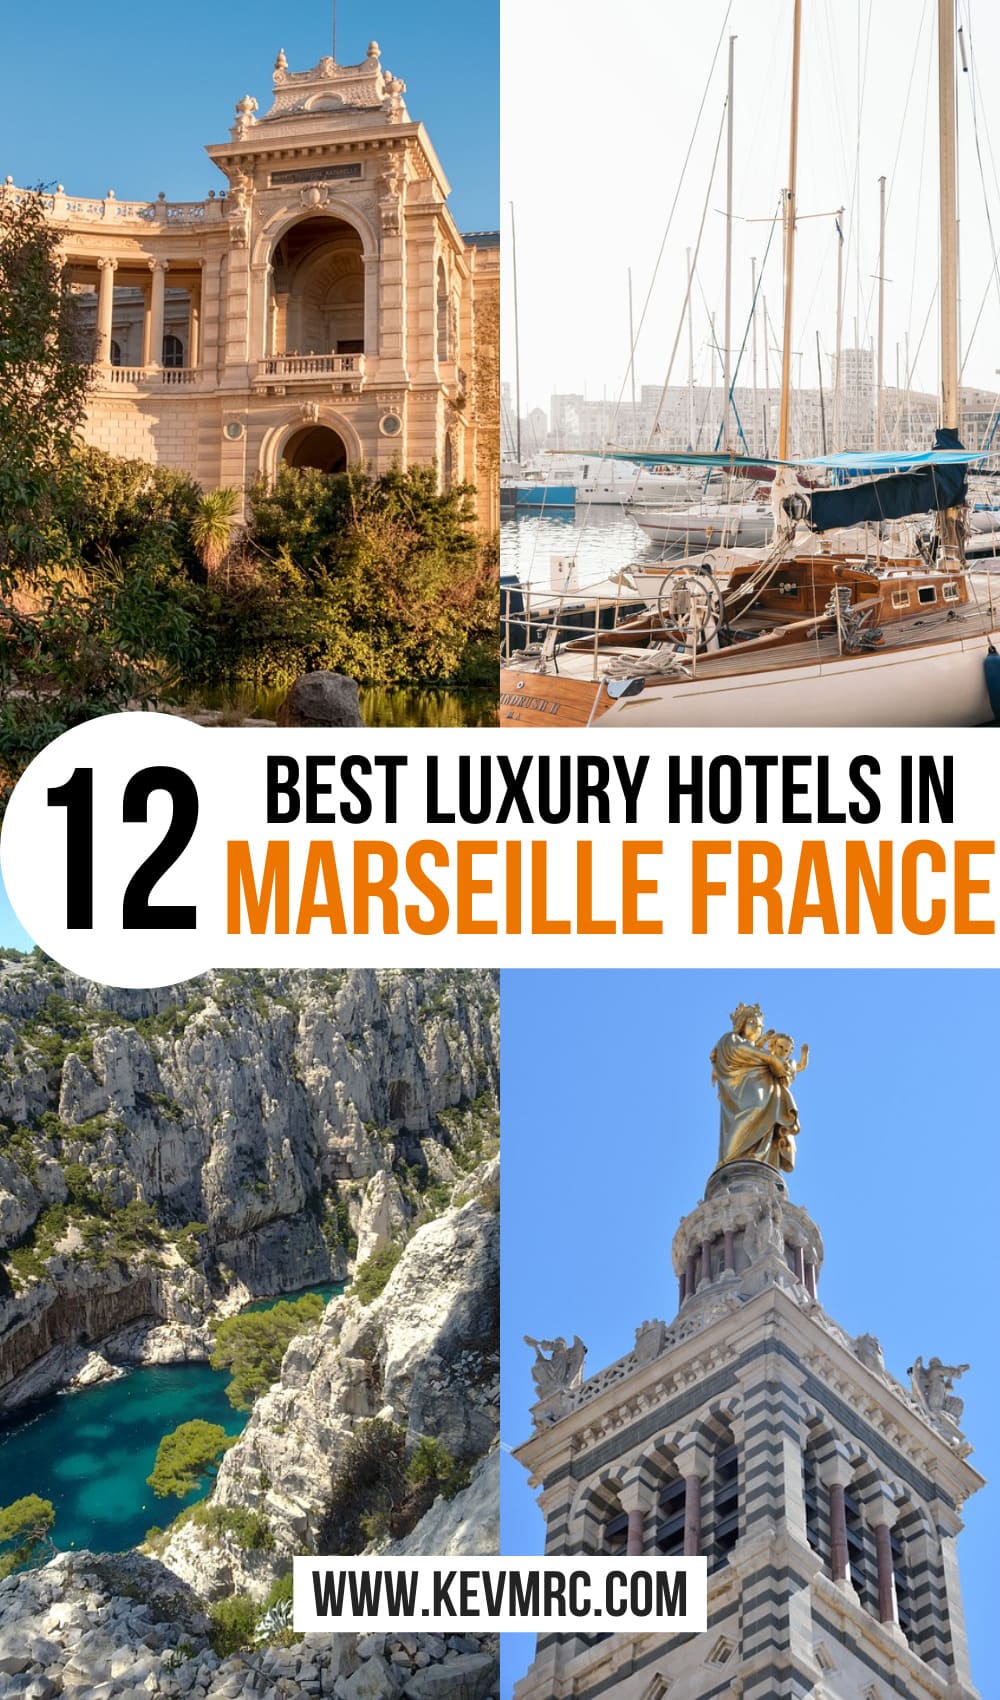 I’ve put up together this list of the 12 best luxury hotels Marseille has to offer, the ones that will provide you with the best experience and make your trip unforgettable! hotel marseille | marseille france hotels | where to stay in marseille | marseille luxury hotels